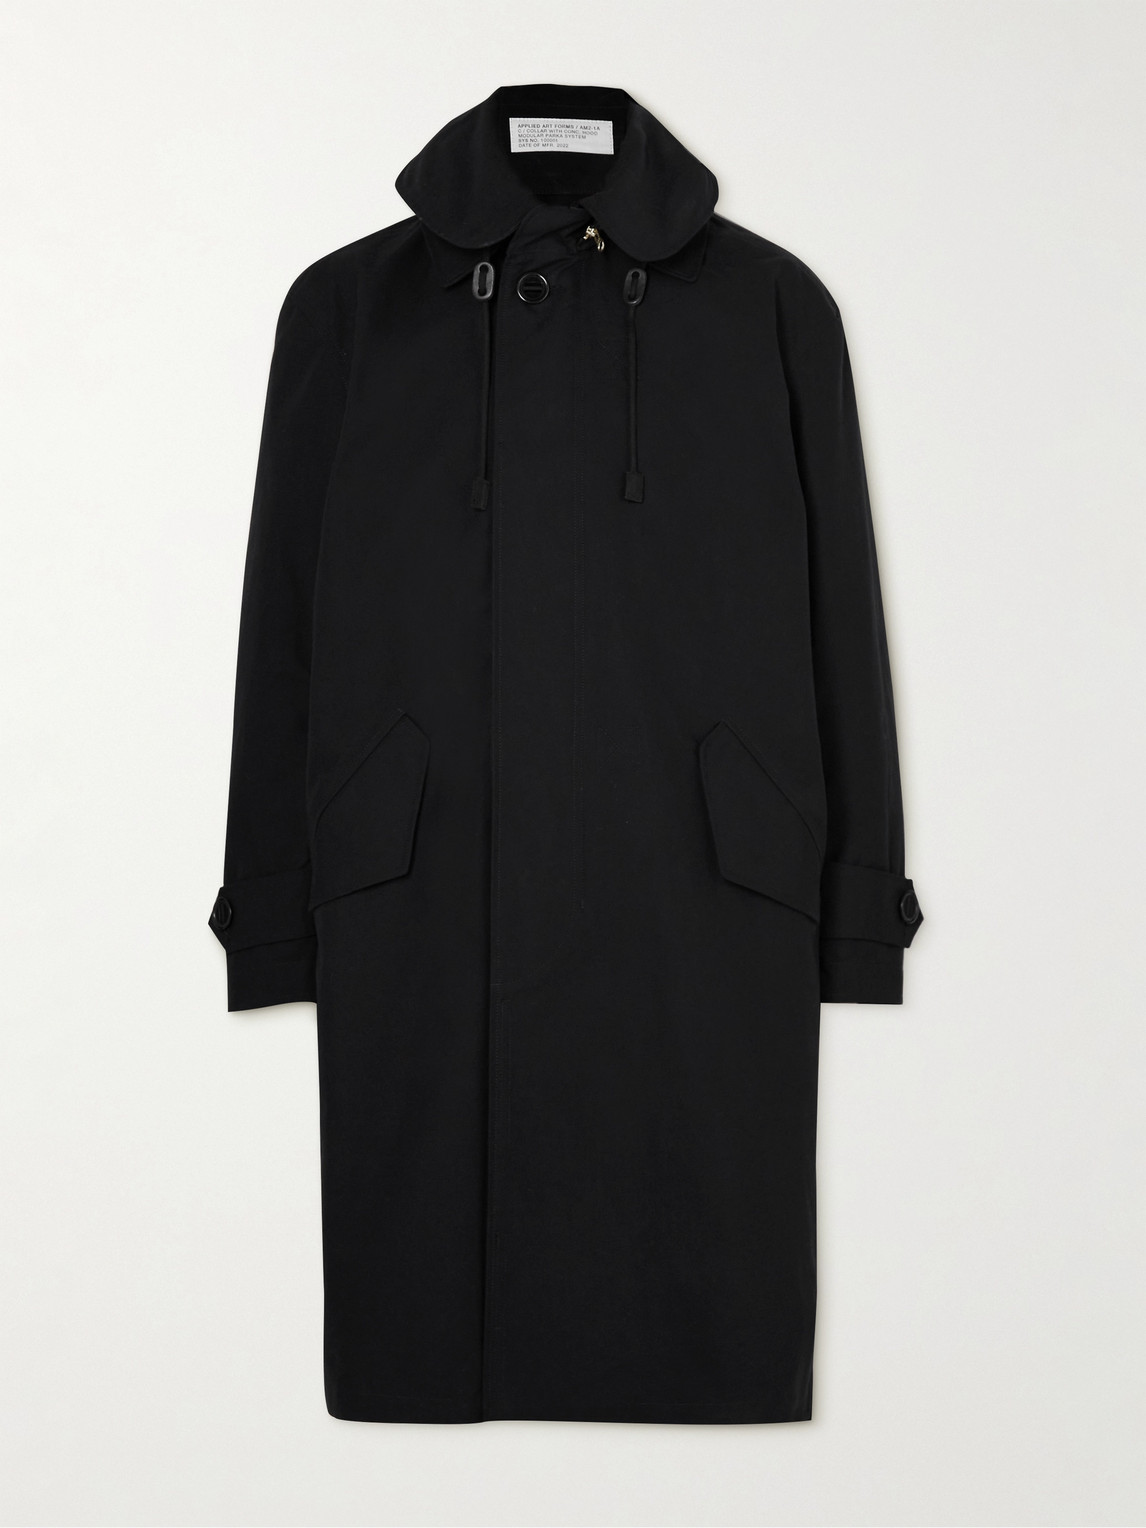 Applied Art Forms Am2-1a Convertible Padded Cotton Hooded Parka With Detachable Liner In Black